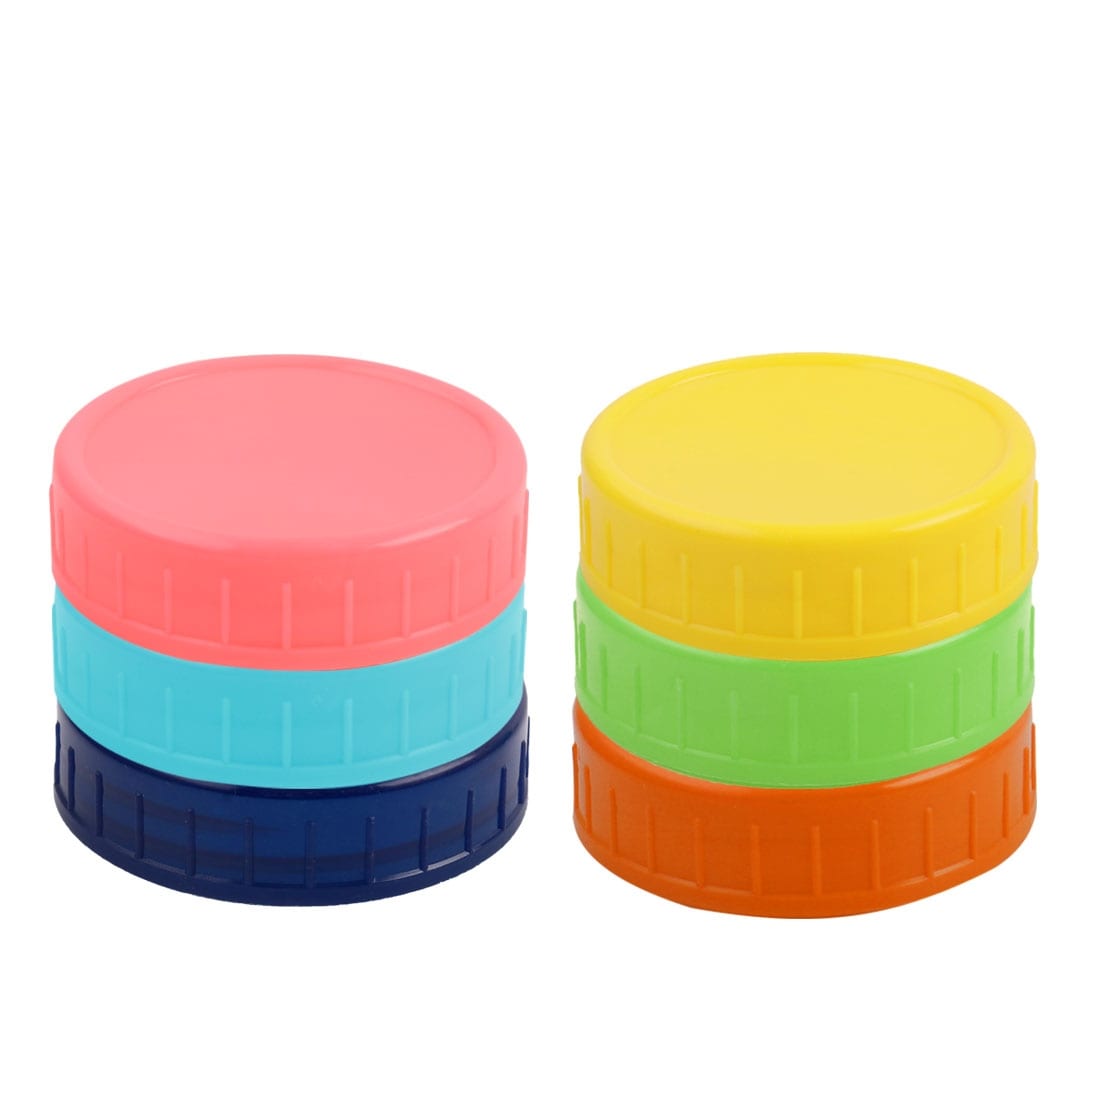 https://ak1.ostkcdn.com/images/products/is/images/direct/ba364f483effd1d5ef17a42be8404ac04c382908/6-Pcs-Assorted-Color-Plastic-Regular-Mouth-Mason-Jar-Lids-Food-Storage-Caps-for-Mason-Canning-Ball-Jars.jpg